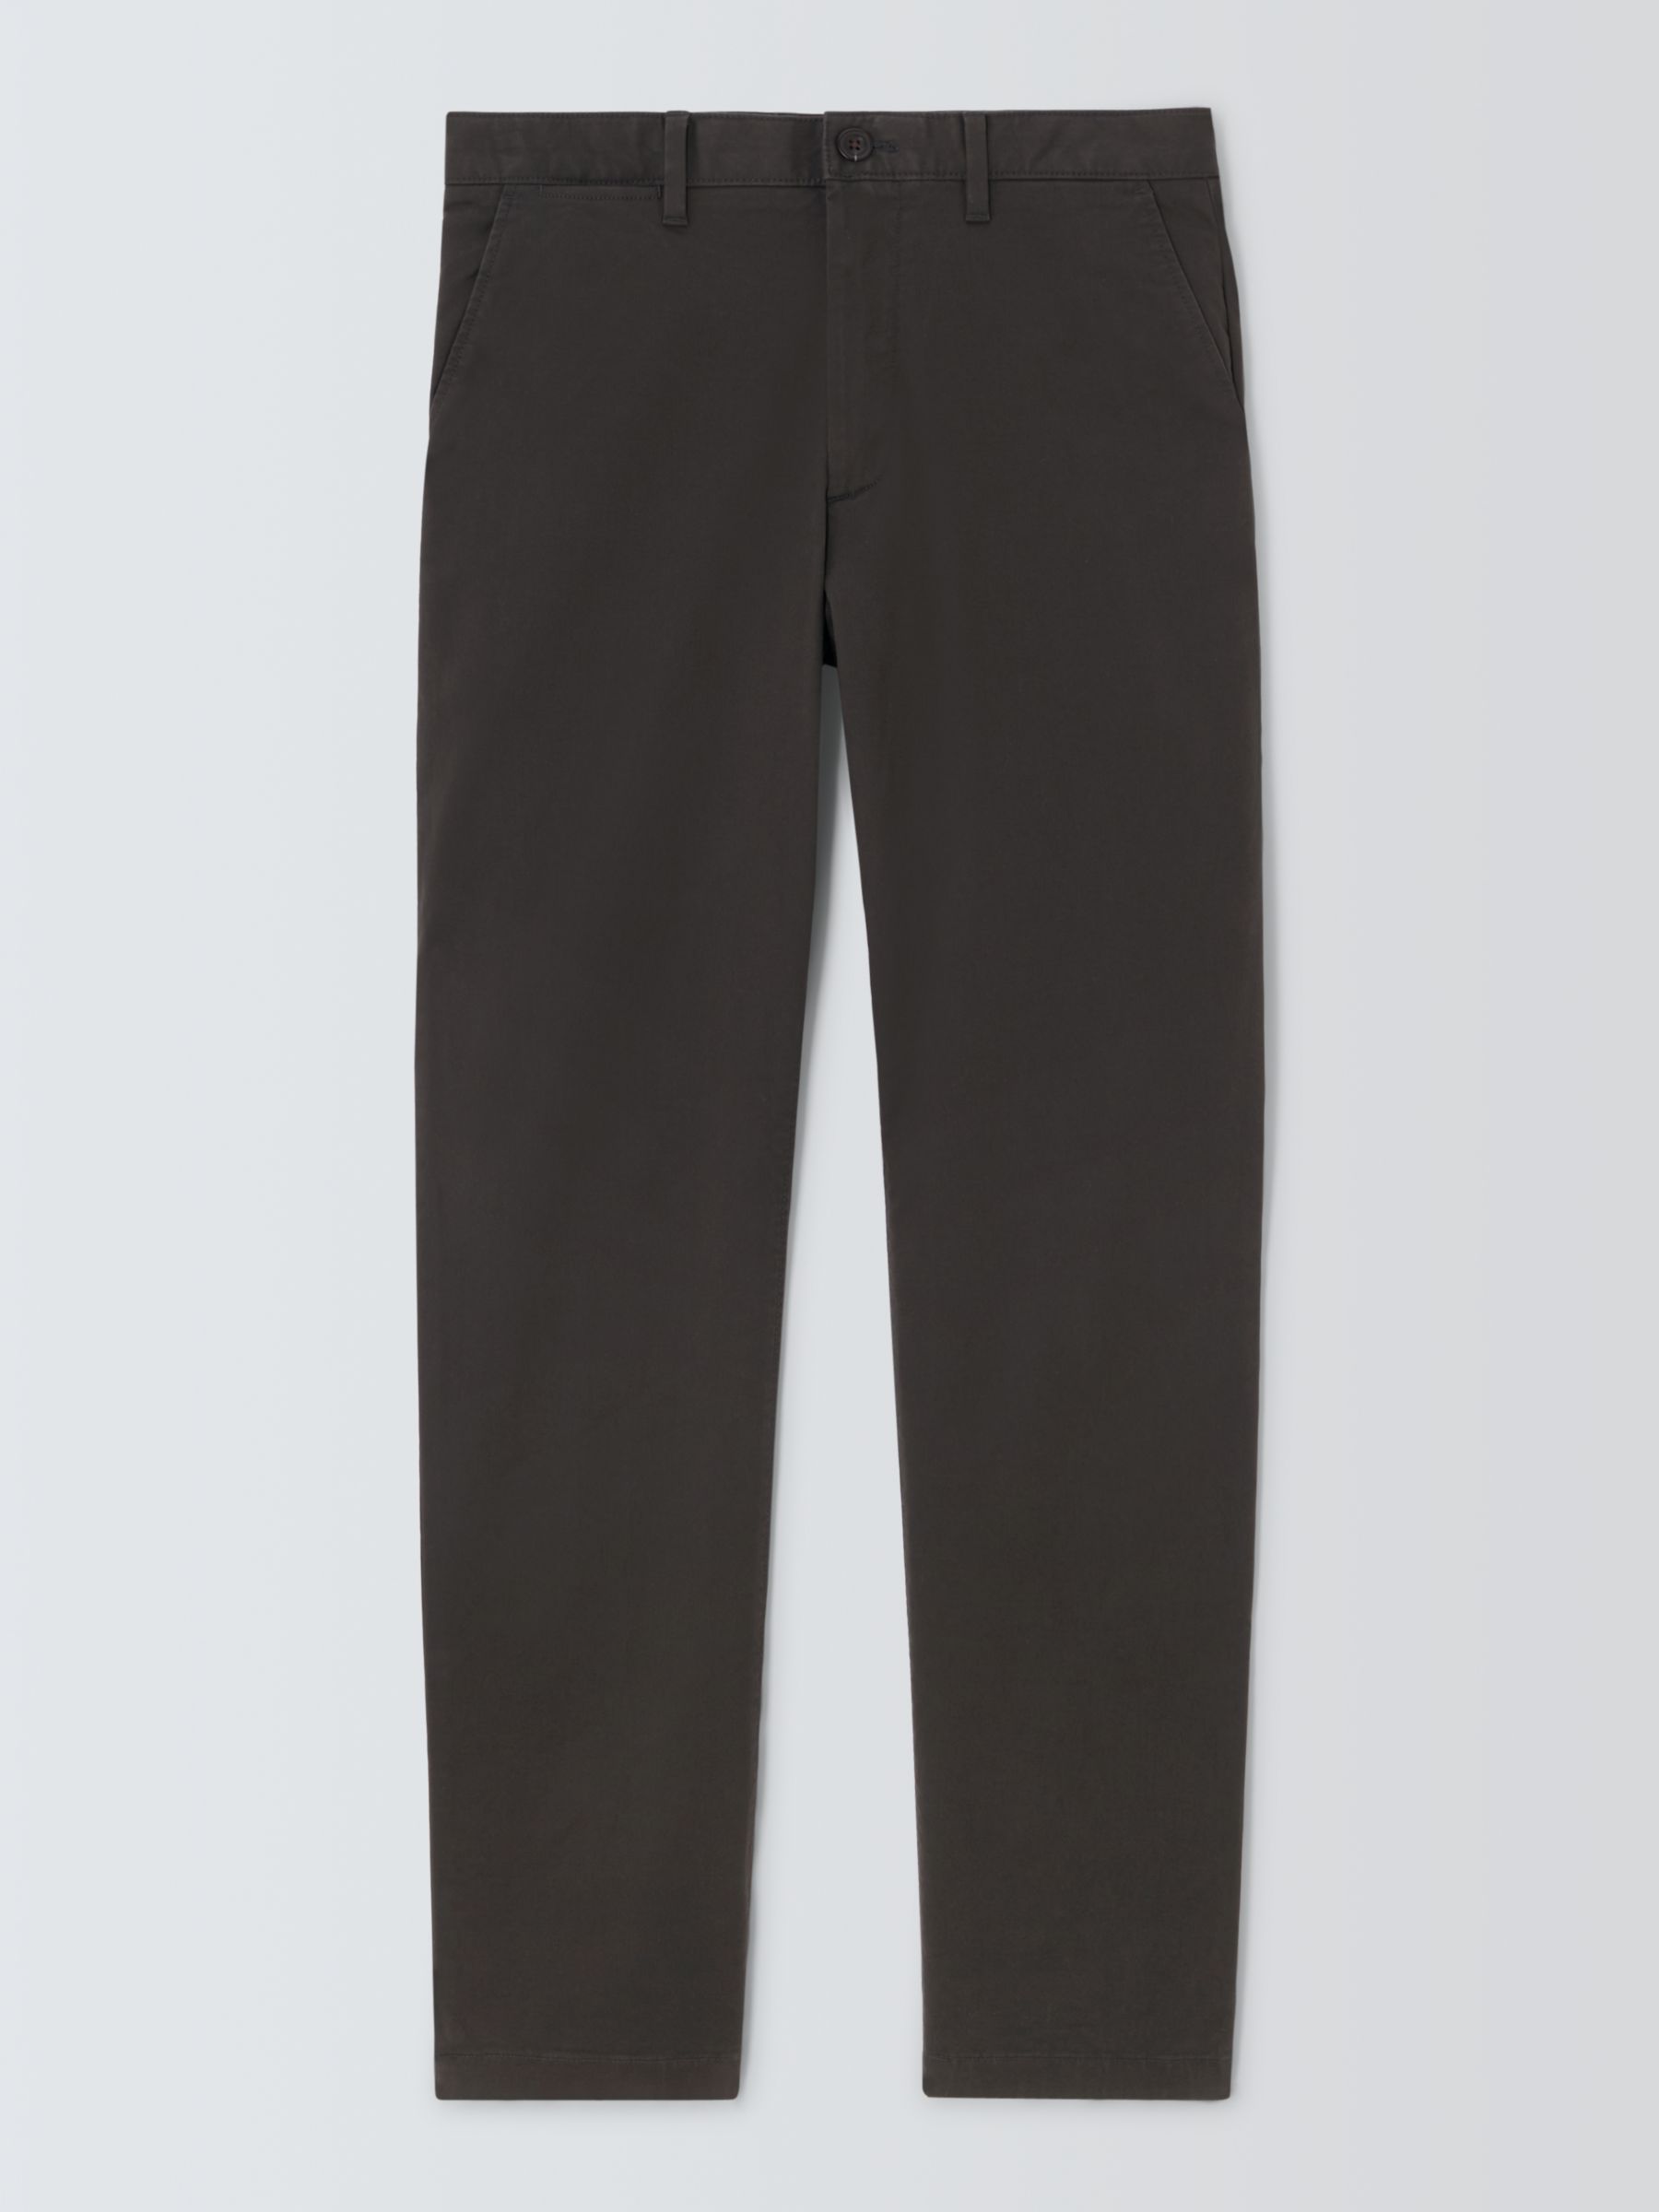 John Lewis Essential Straight Cut Chinos, Olive, 30S